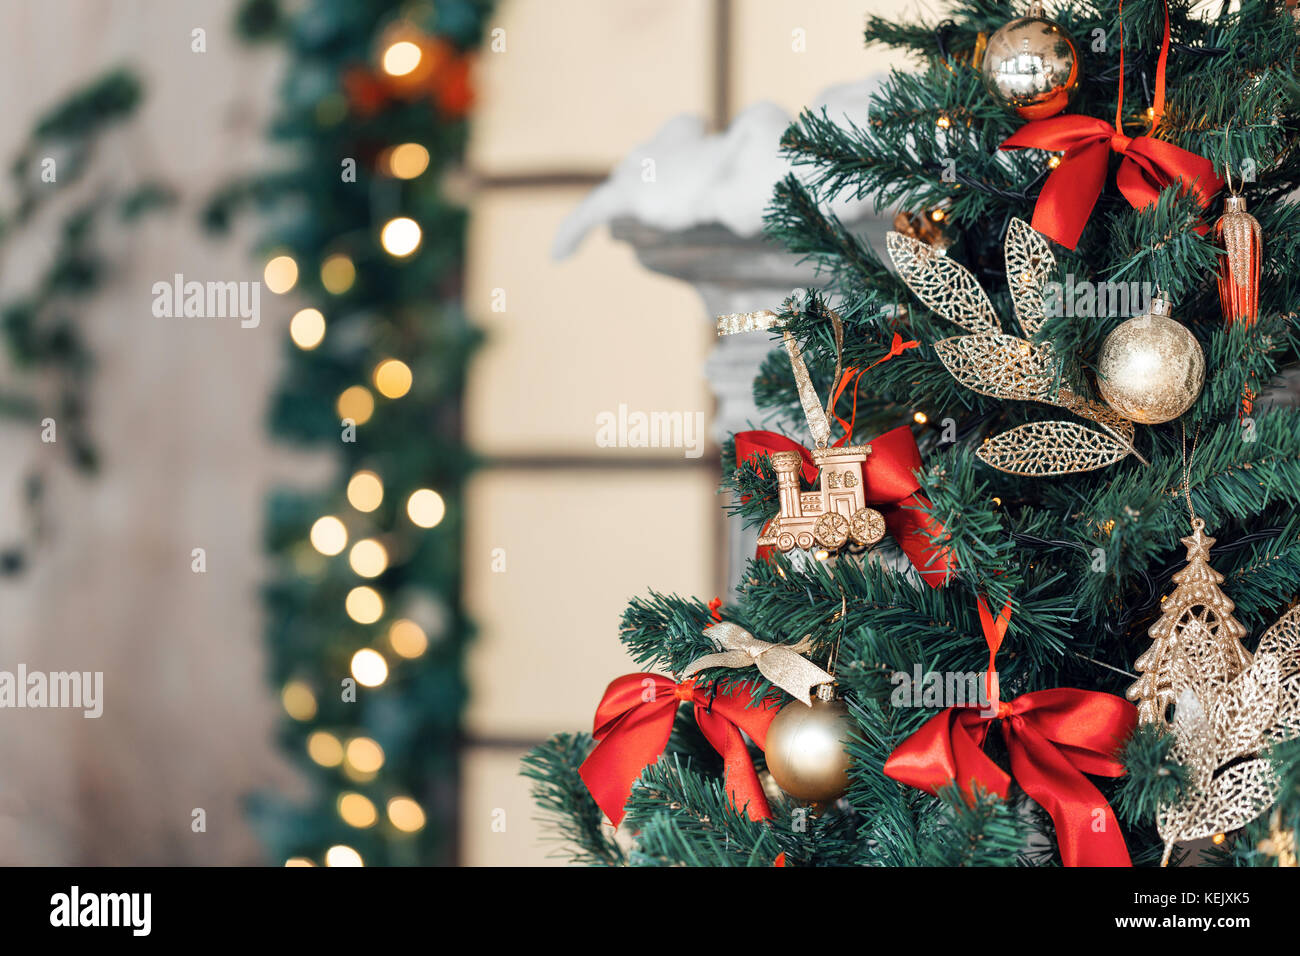 Christmas toy train and garland on the fir tree Stock Image